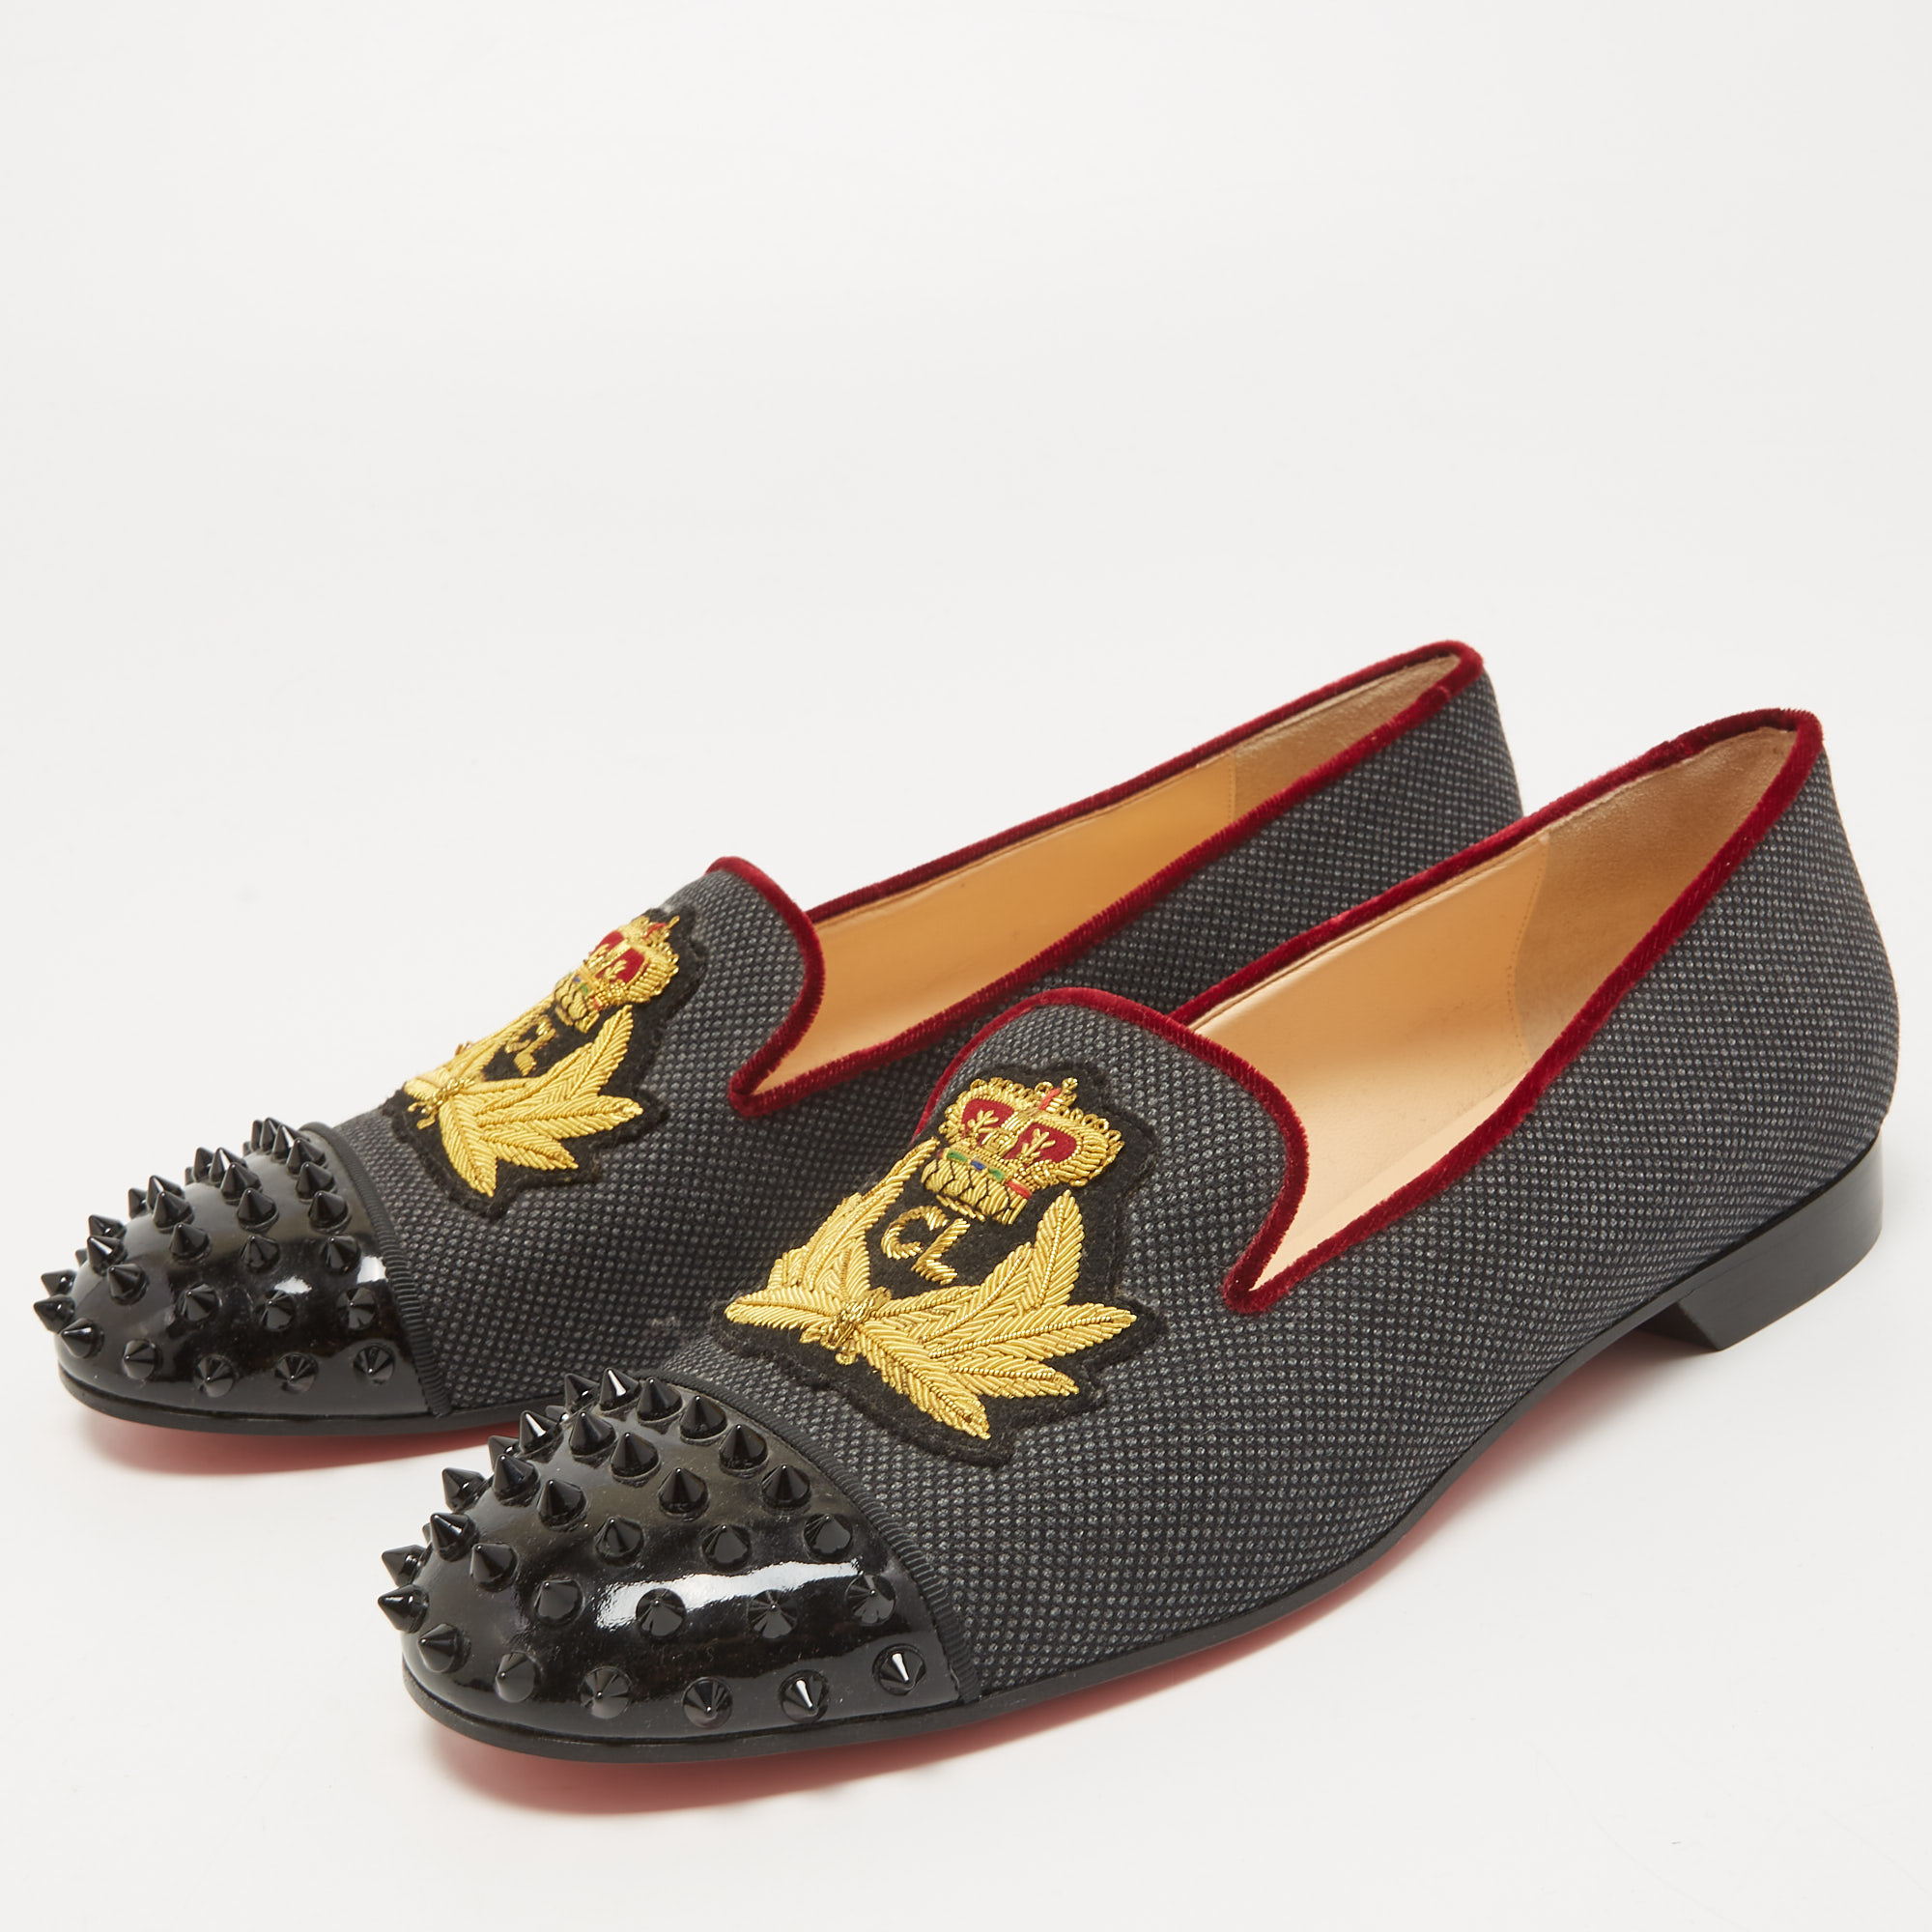 

Christian Louboutin Grey/Black Spiked Patent Leather and Fabric Harvanana Smoking Slippers Size